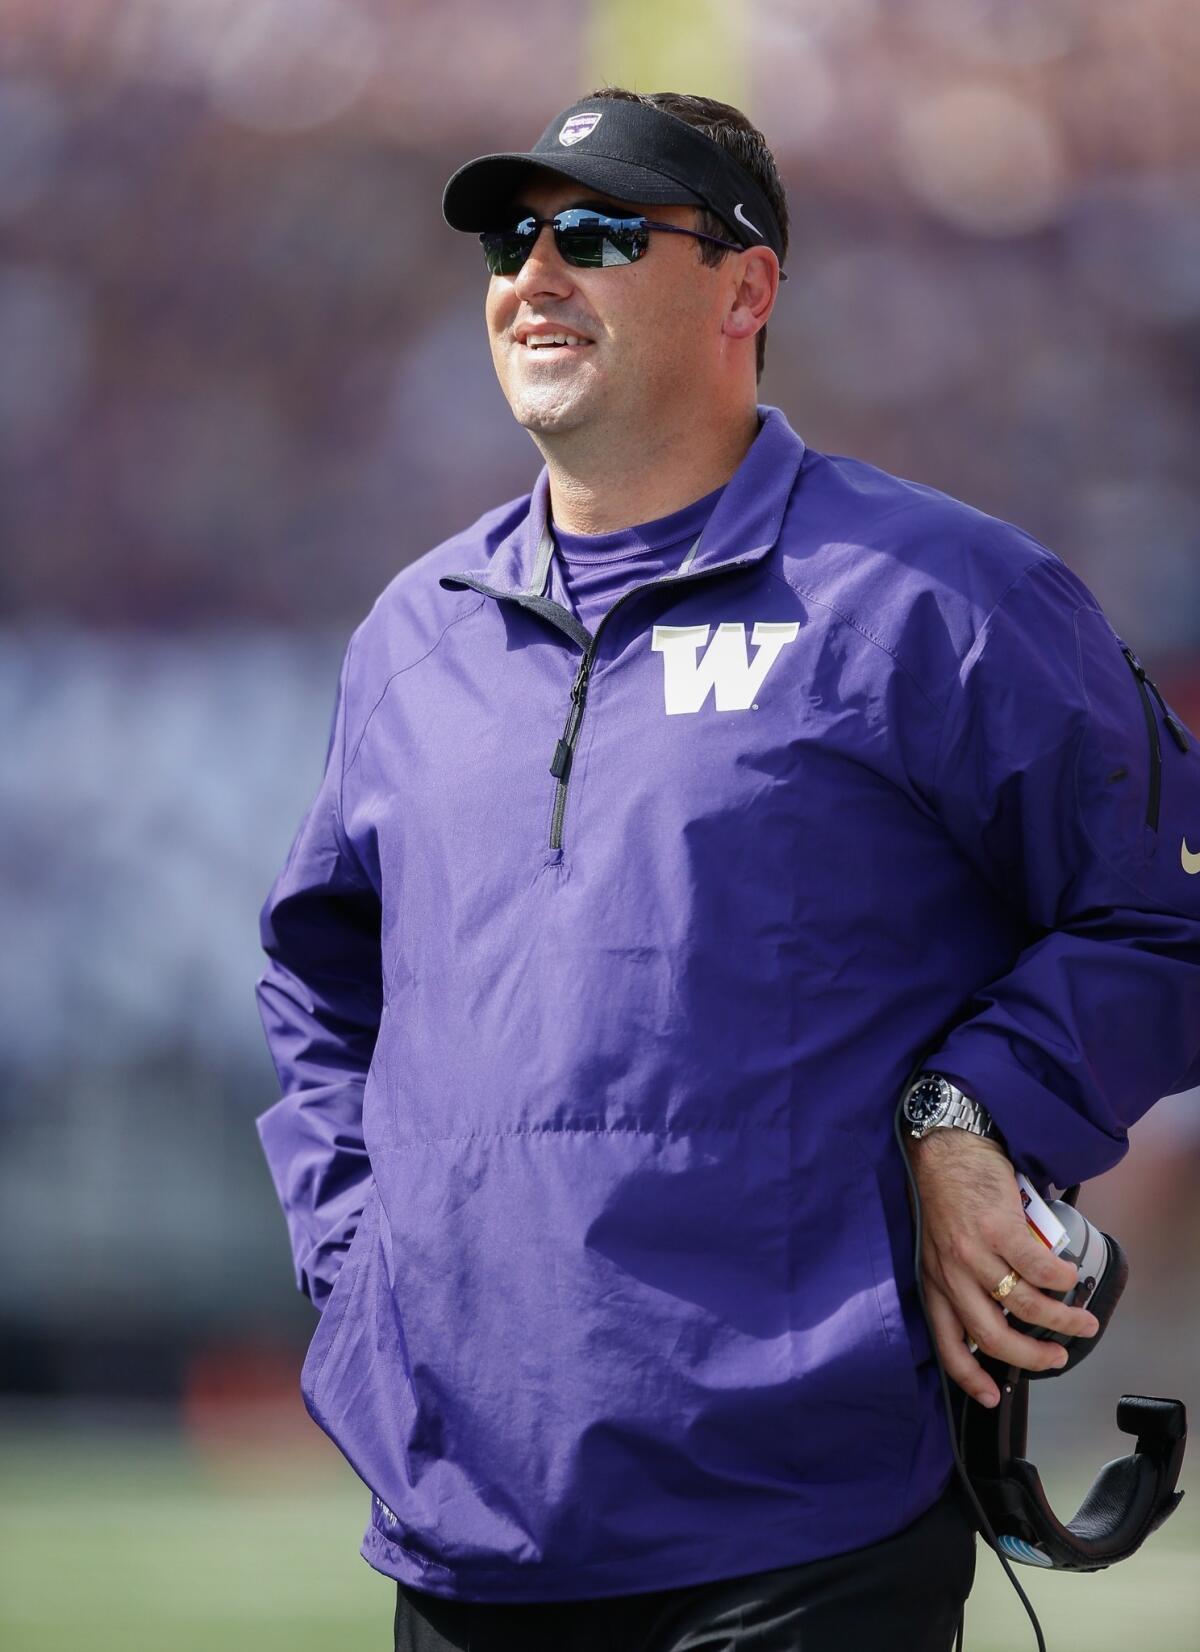 Washington Coach Steve Sarkisian's 'cool' week will get even better if the Huskies pull off an upset against Stanford on Saturday.